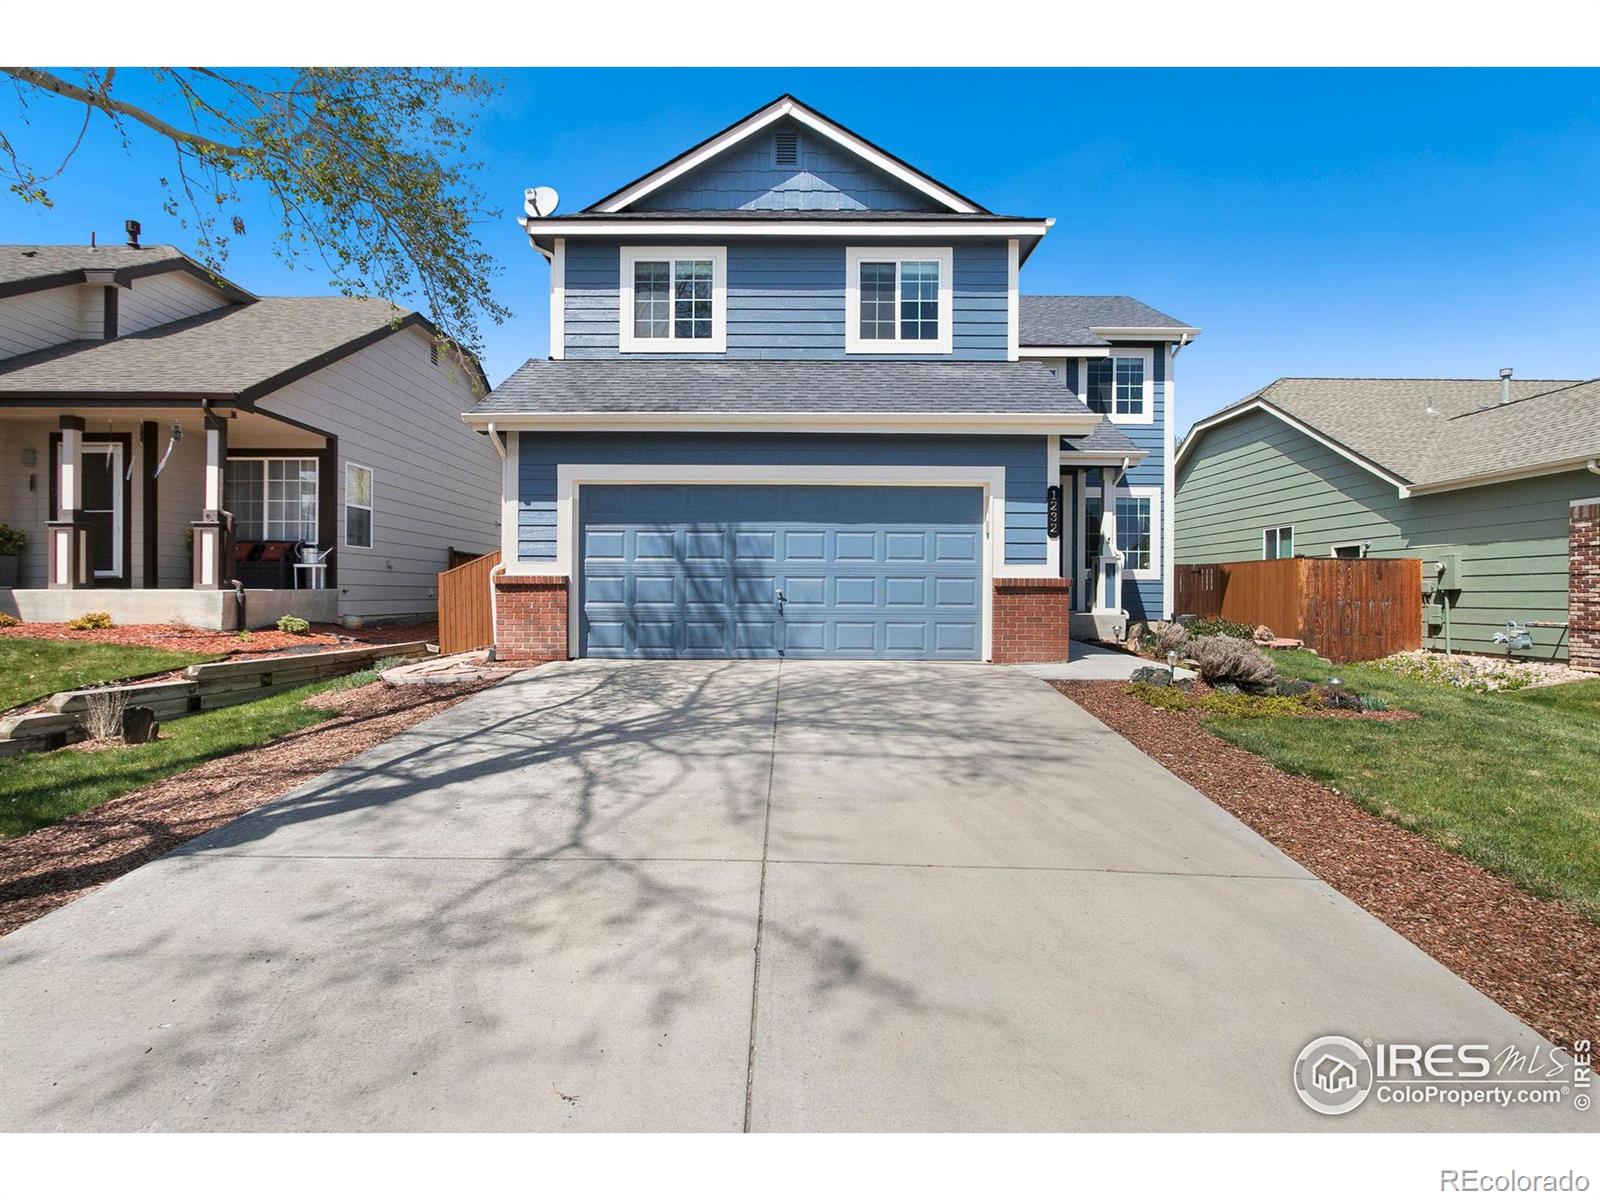 Report Image for 1232  Intrepid Drive,Fort Collins, Colorado